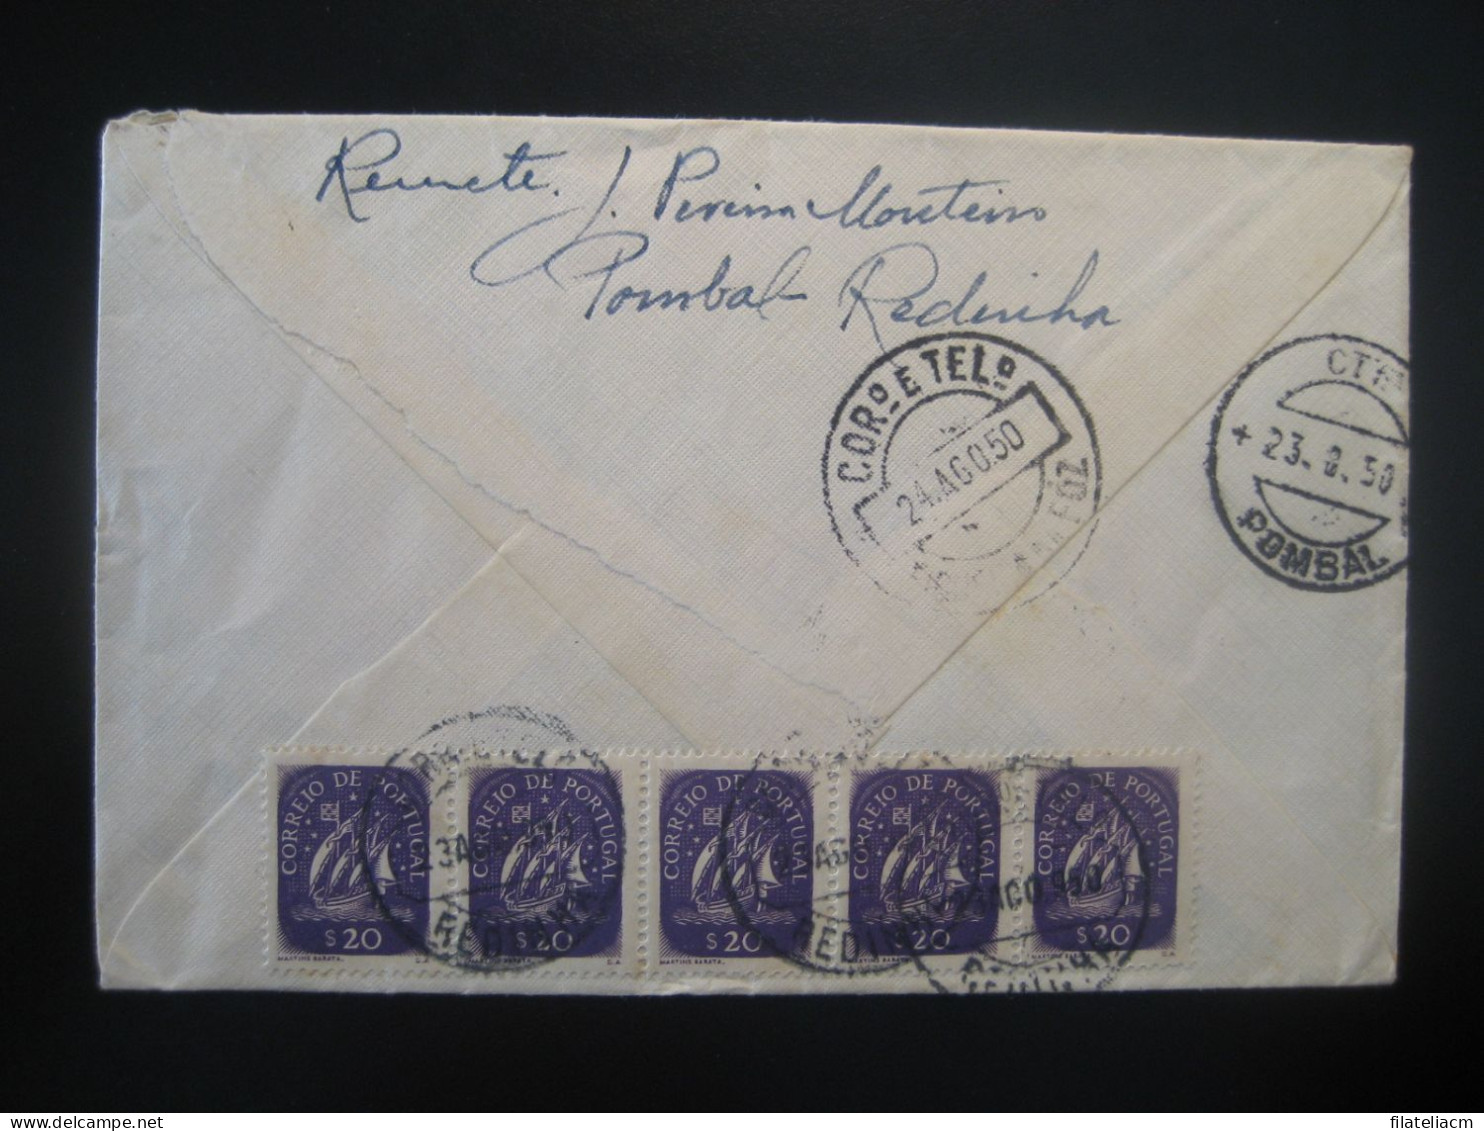 POMBAL 1950 To Figueira Da Foz 5 Stamp Cancel Cover PORTUGAL - Covers & Documents